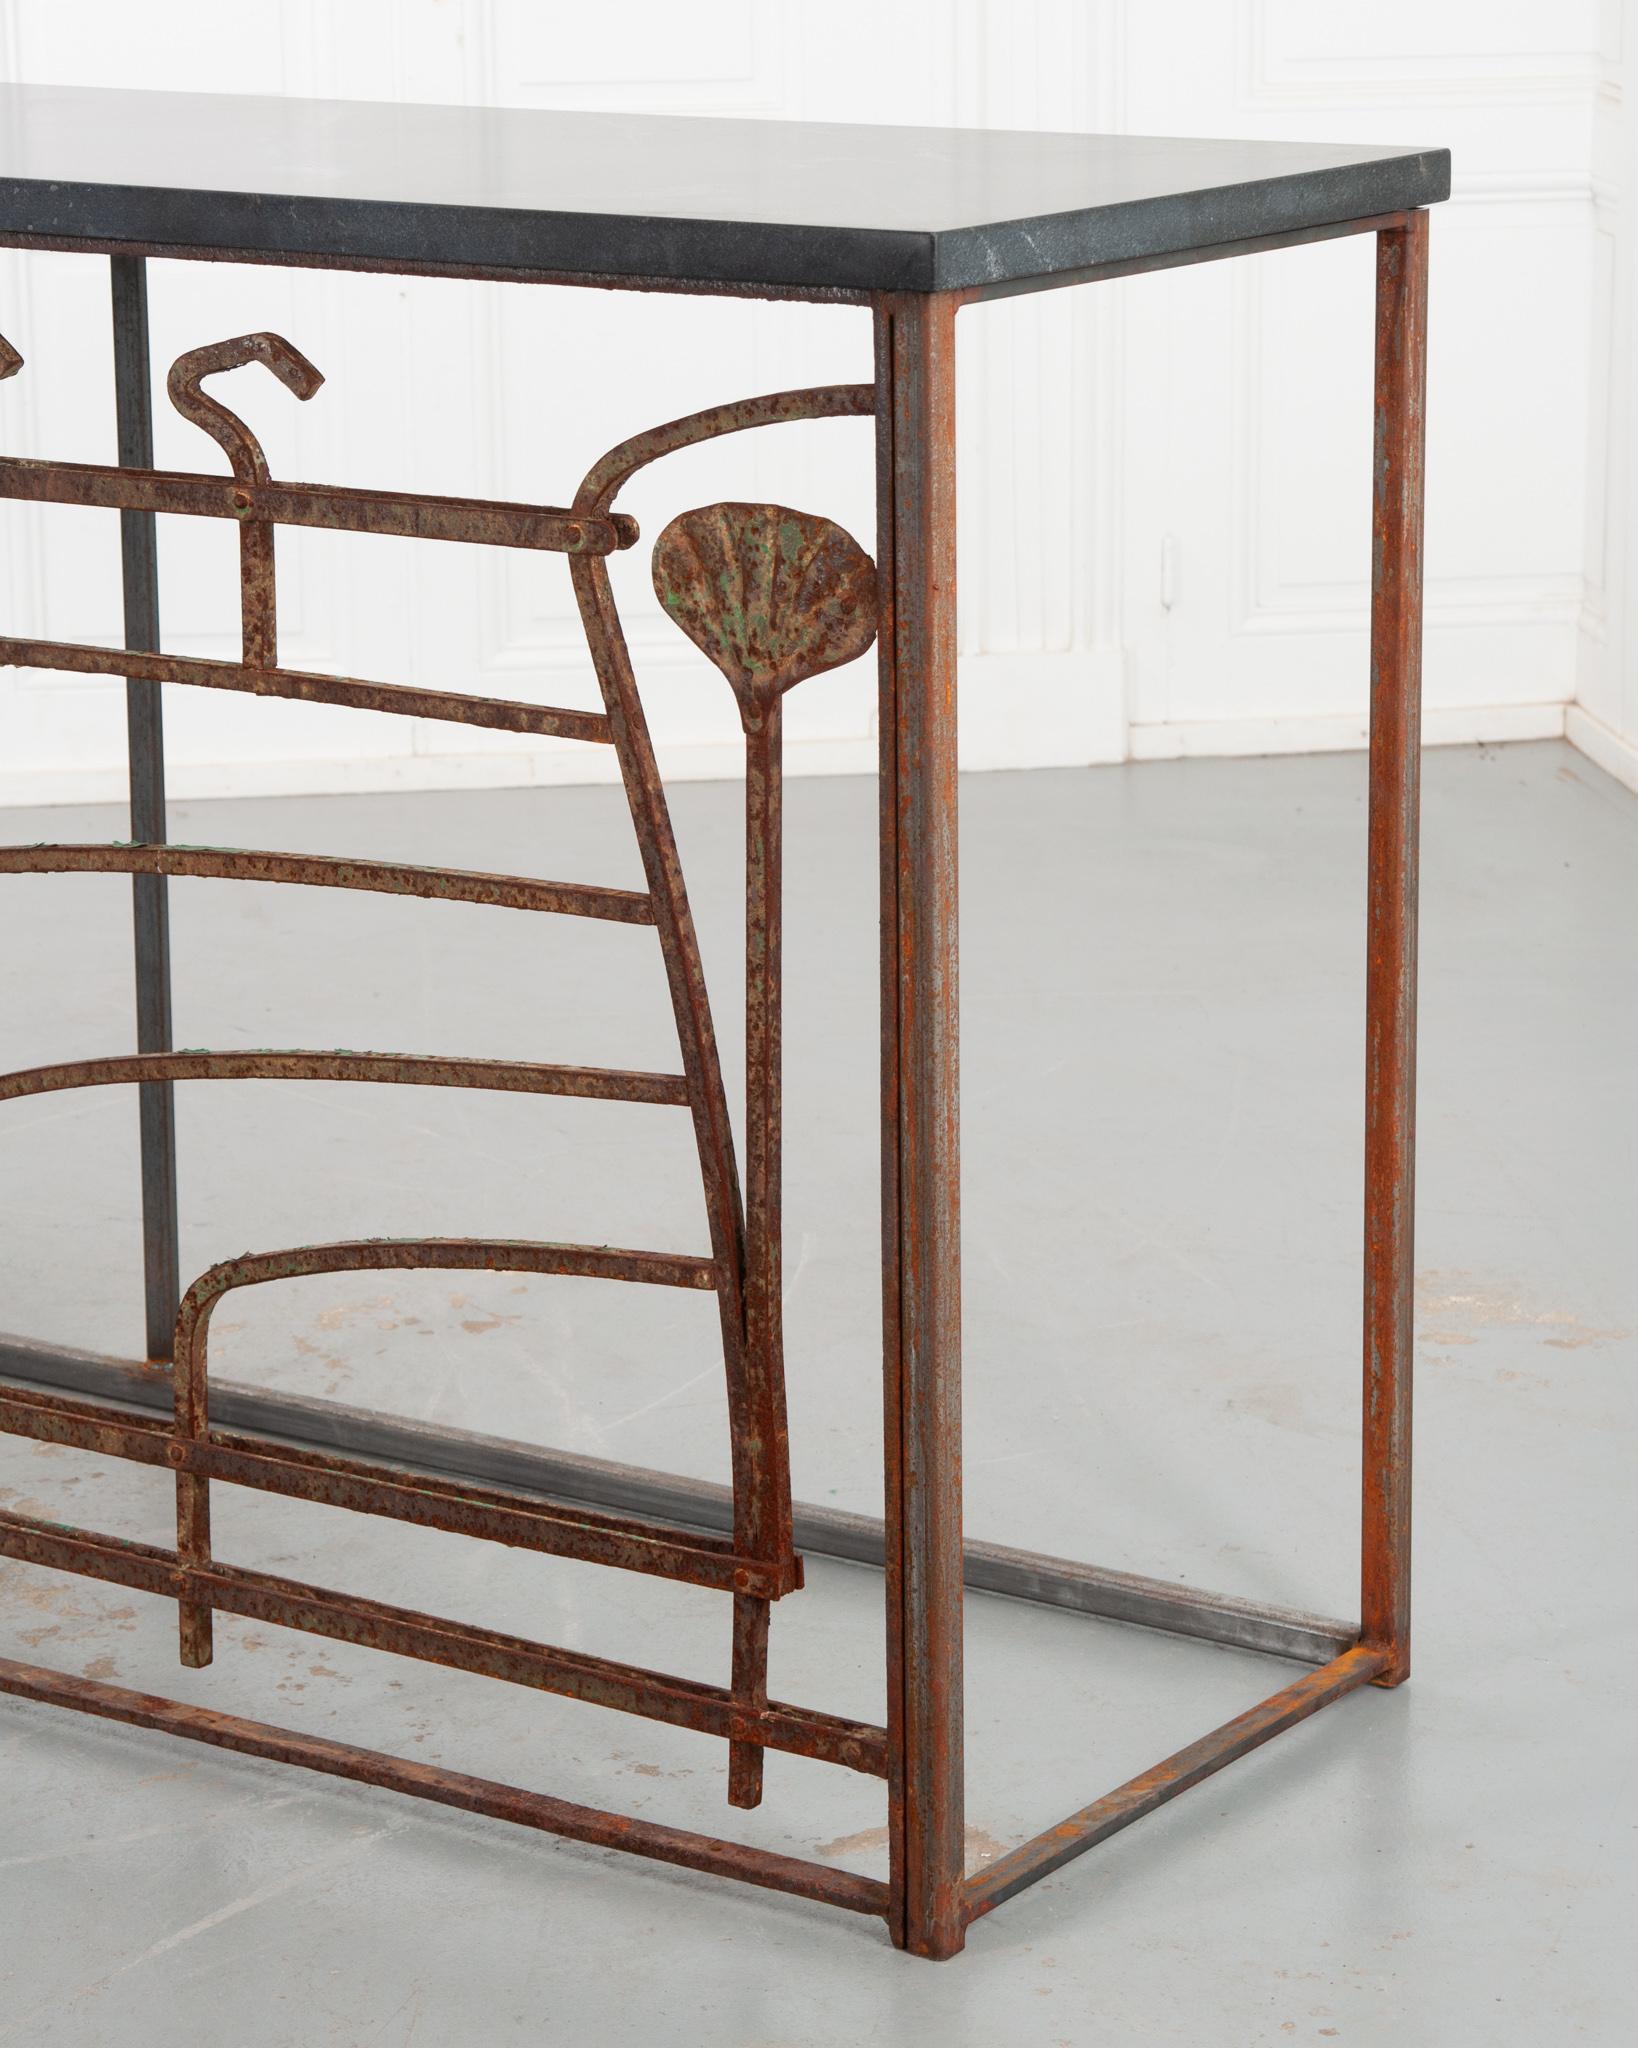 Grand French Art Nouveau Iron & Stone Console For Sale 5